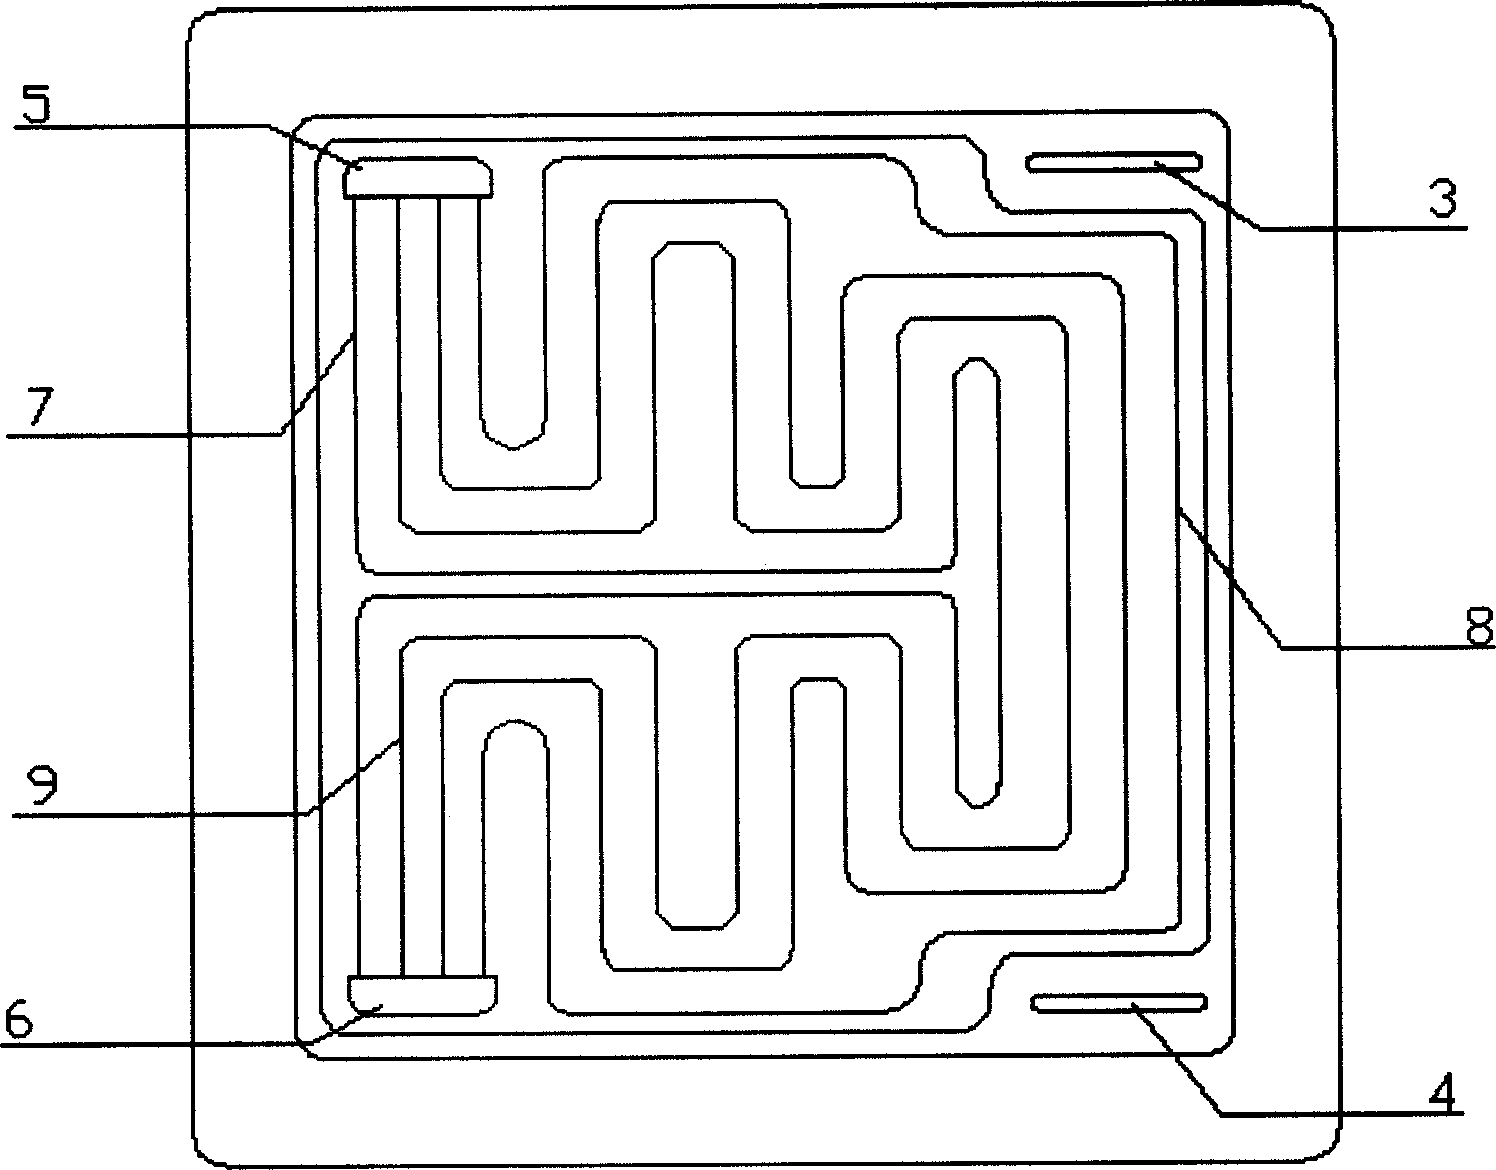 Structure of flow field board for proton exchange film fuel cell